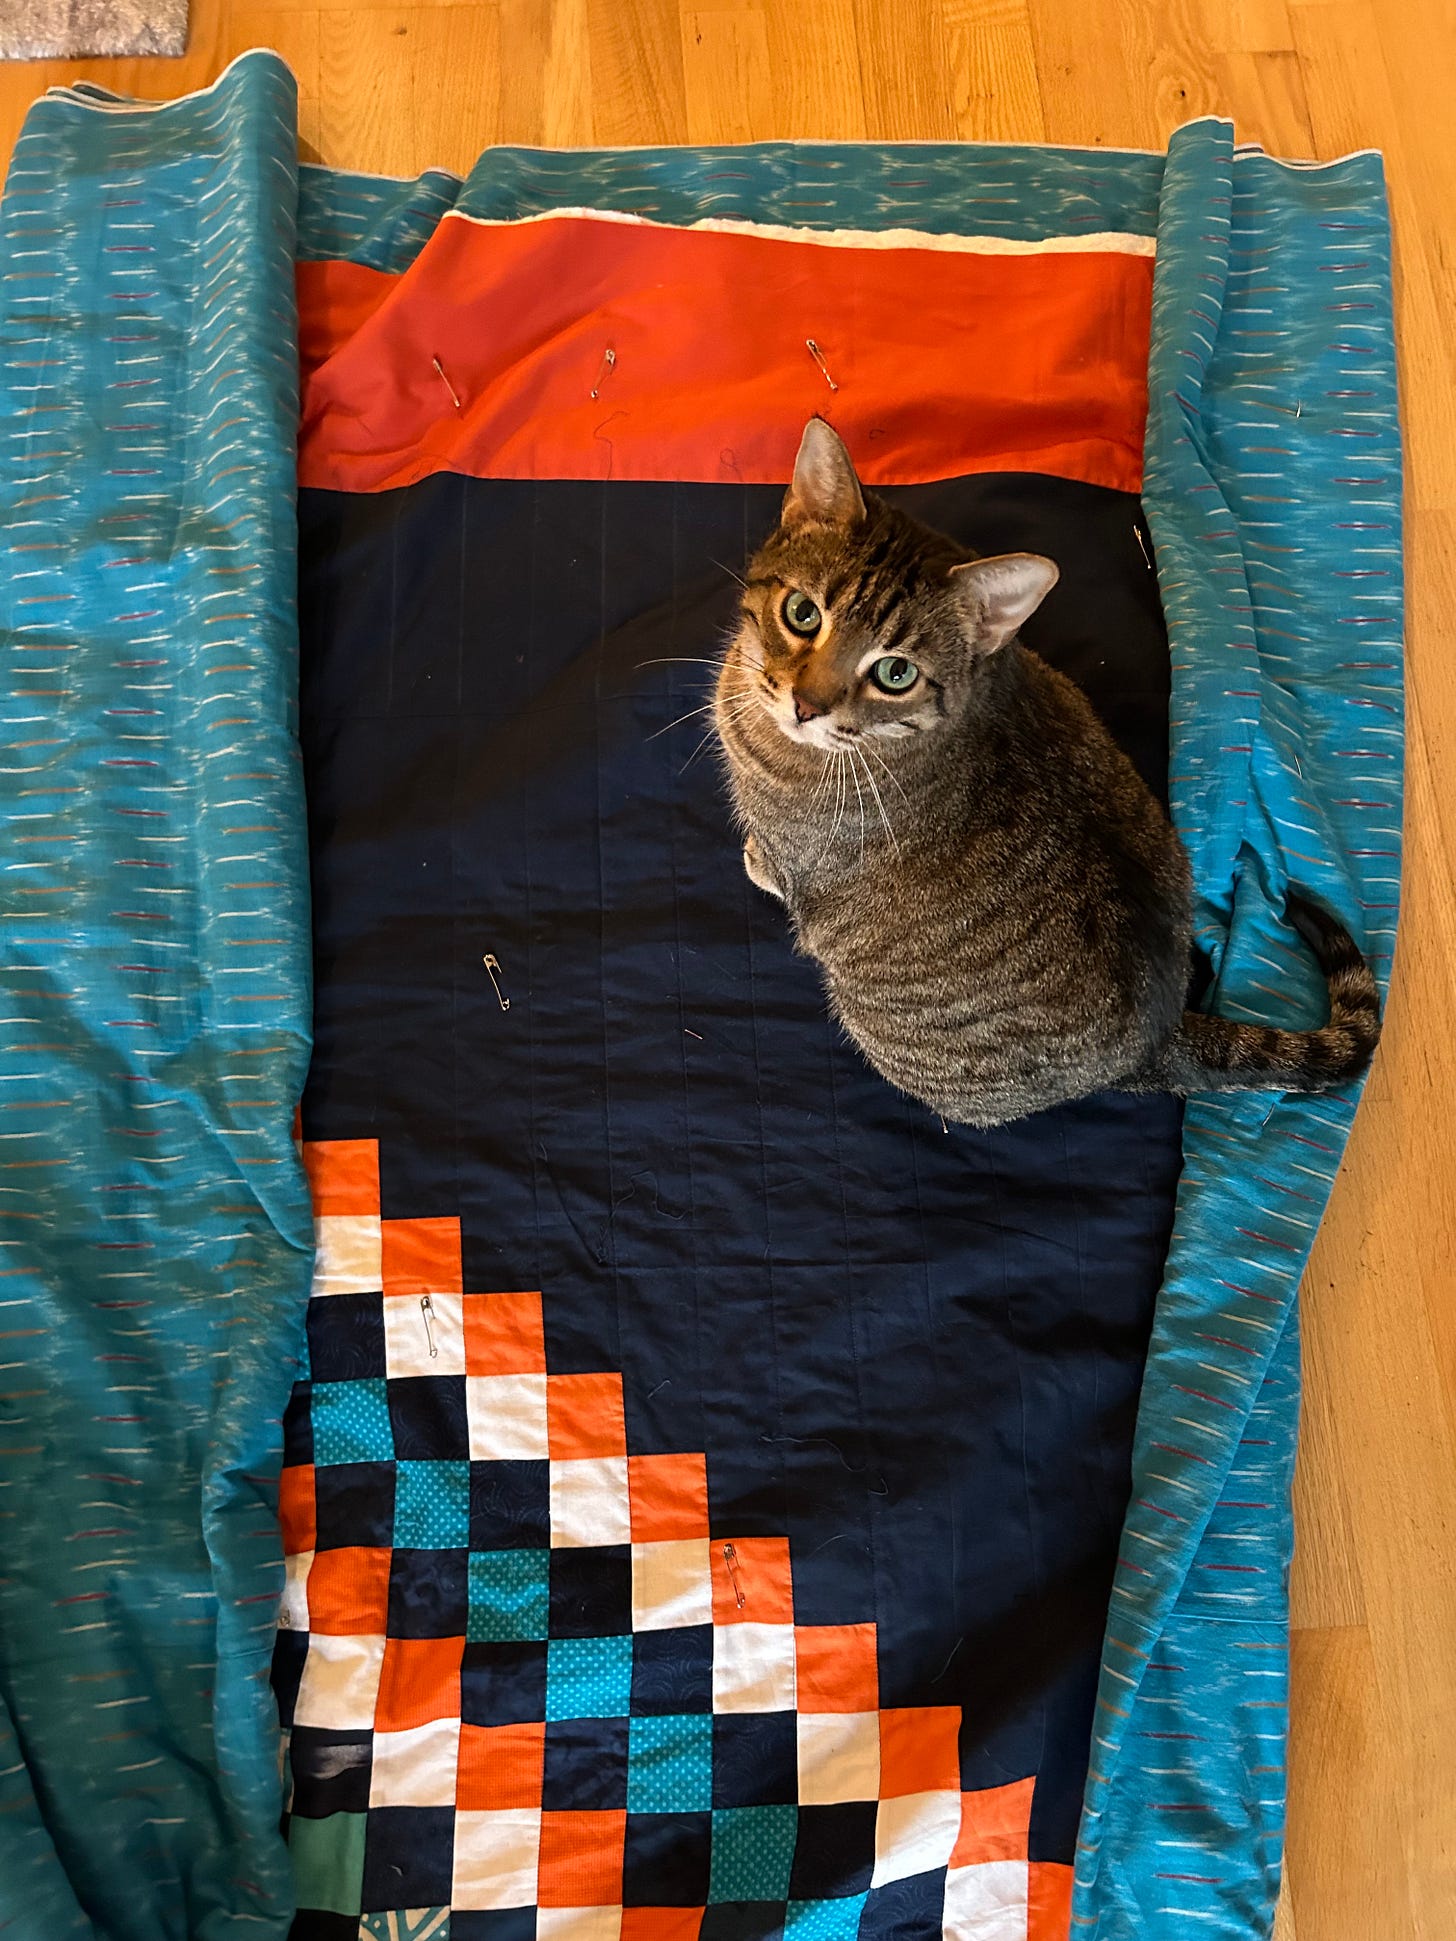 A mischevious tabby cat sitting atop a navy, orange, and teal quilt